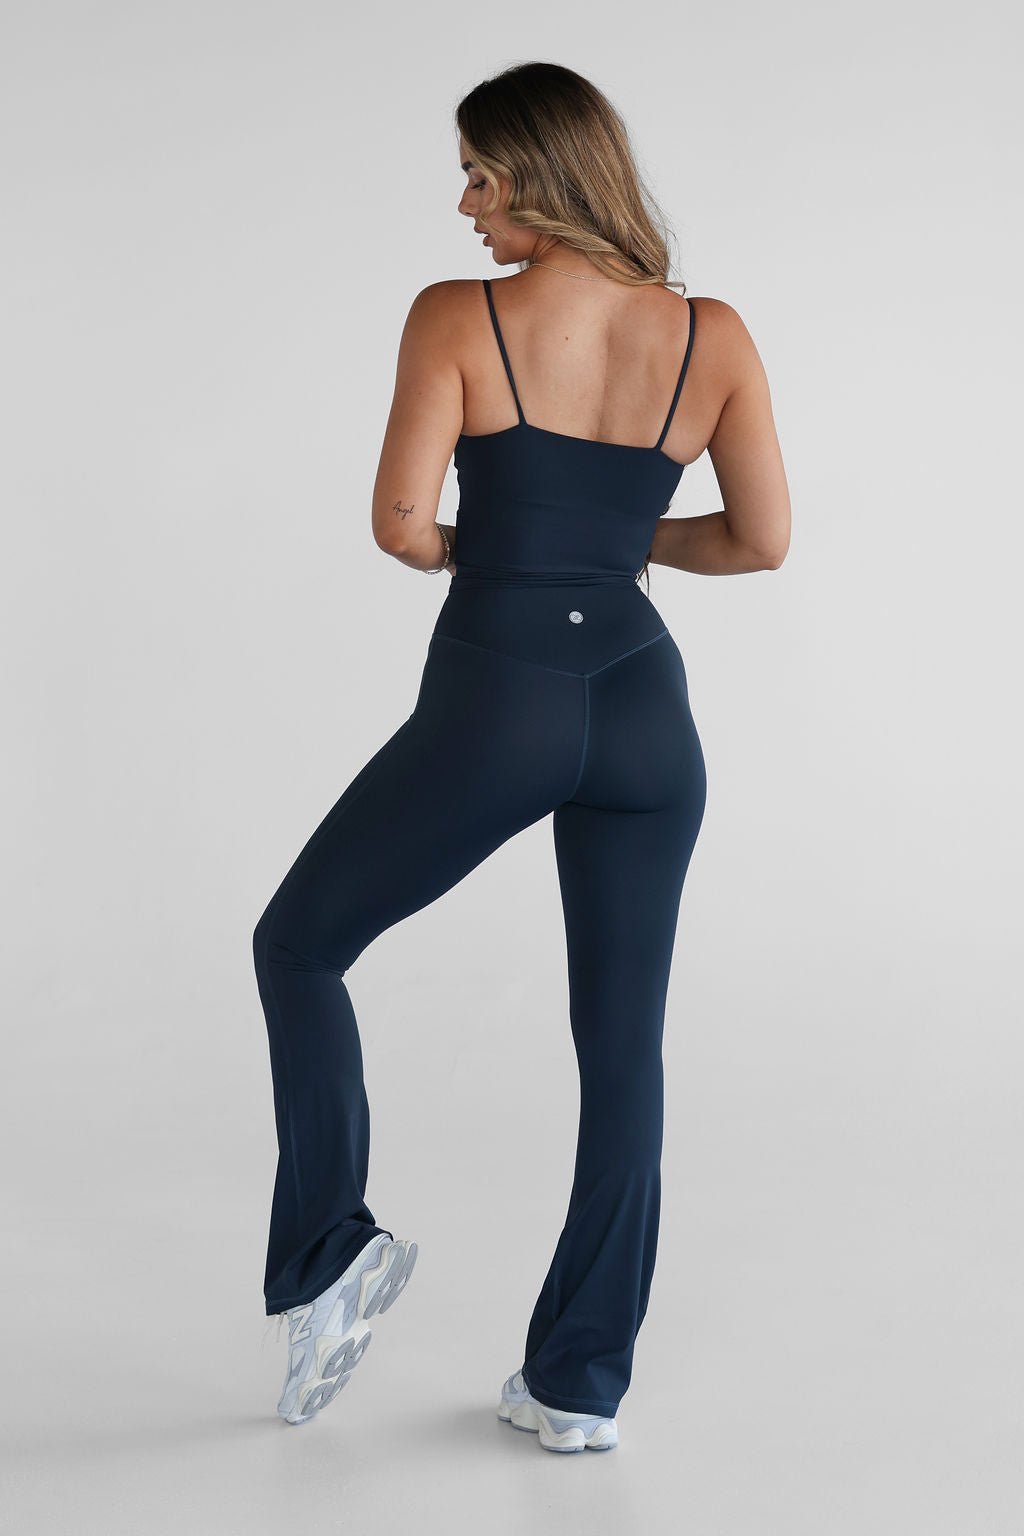 SCULPT Flare Leggings - Navy, High Waisted, Squat Proof, 5 Star Rated